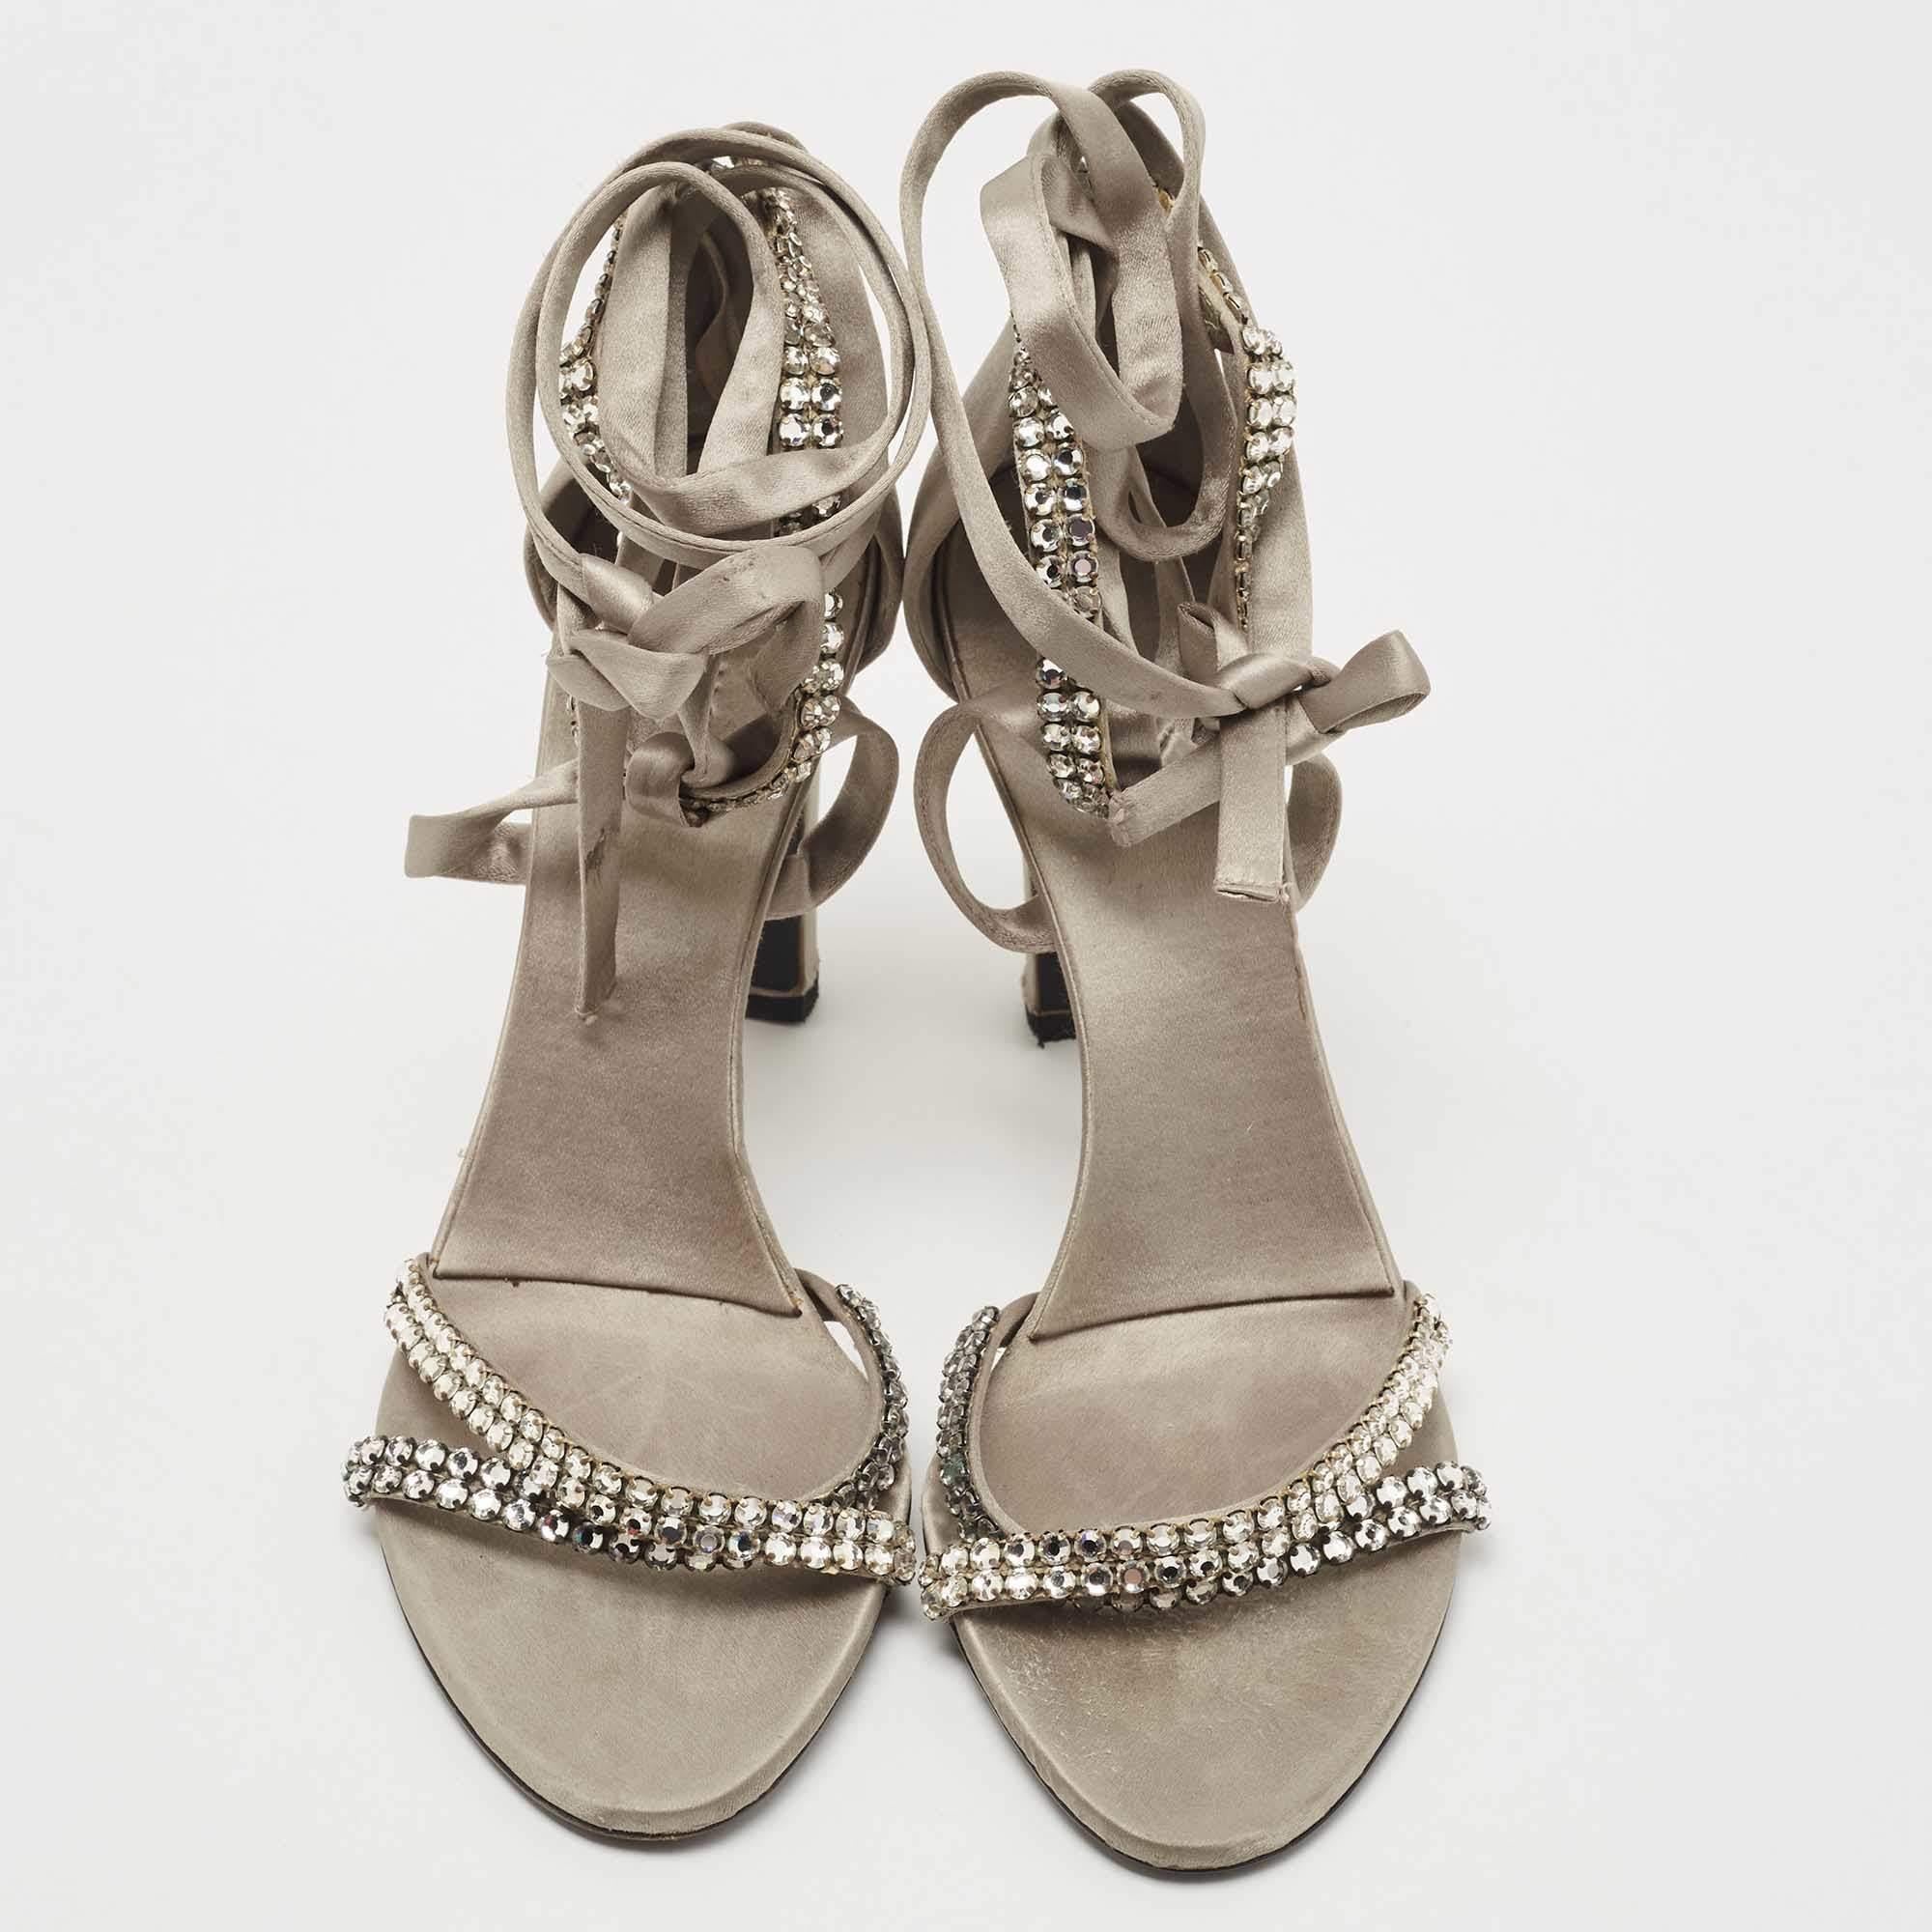 Gucci Grey Satin Crystal Embellished Ankle Wrap Sandals Size 37.5 In Good Condition For Sale In Dubai, Al Qouz 2